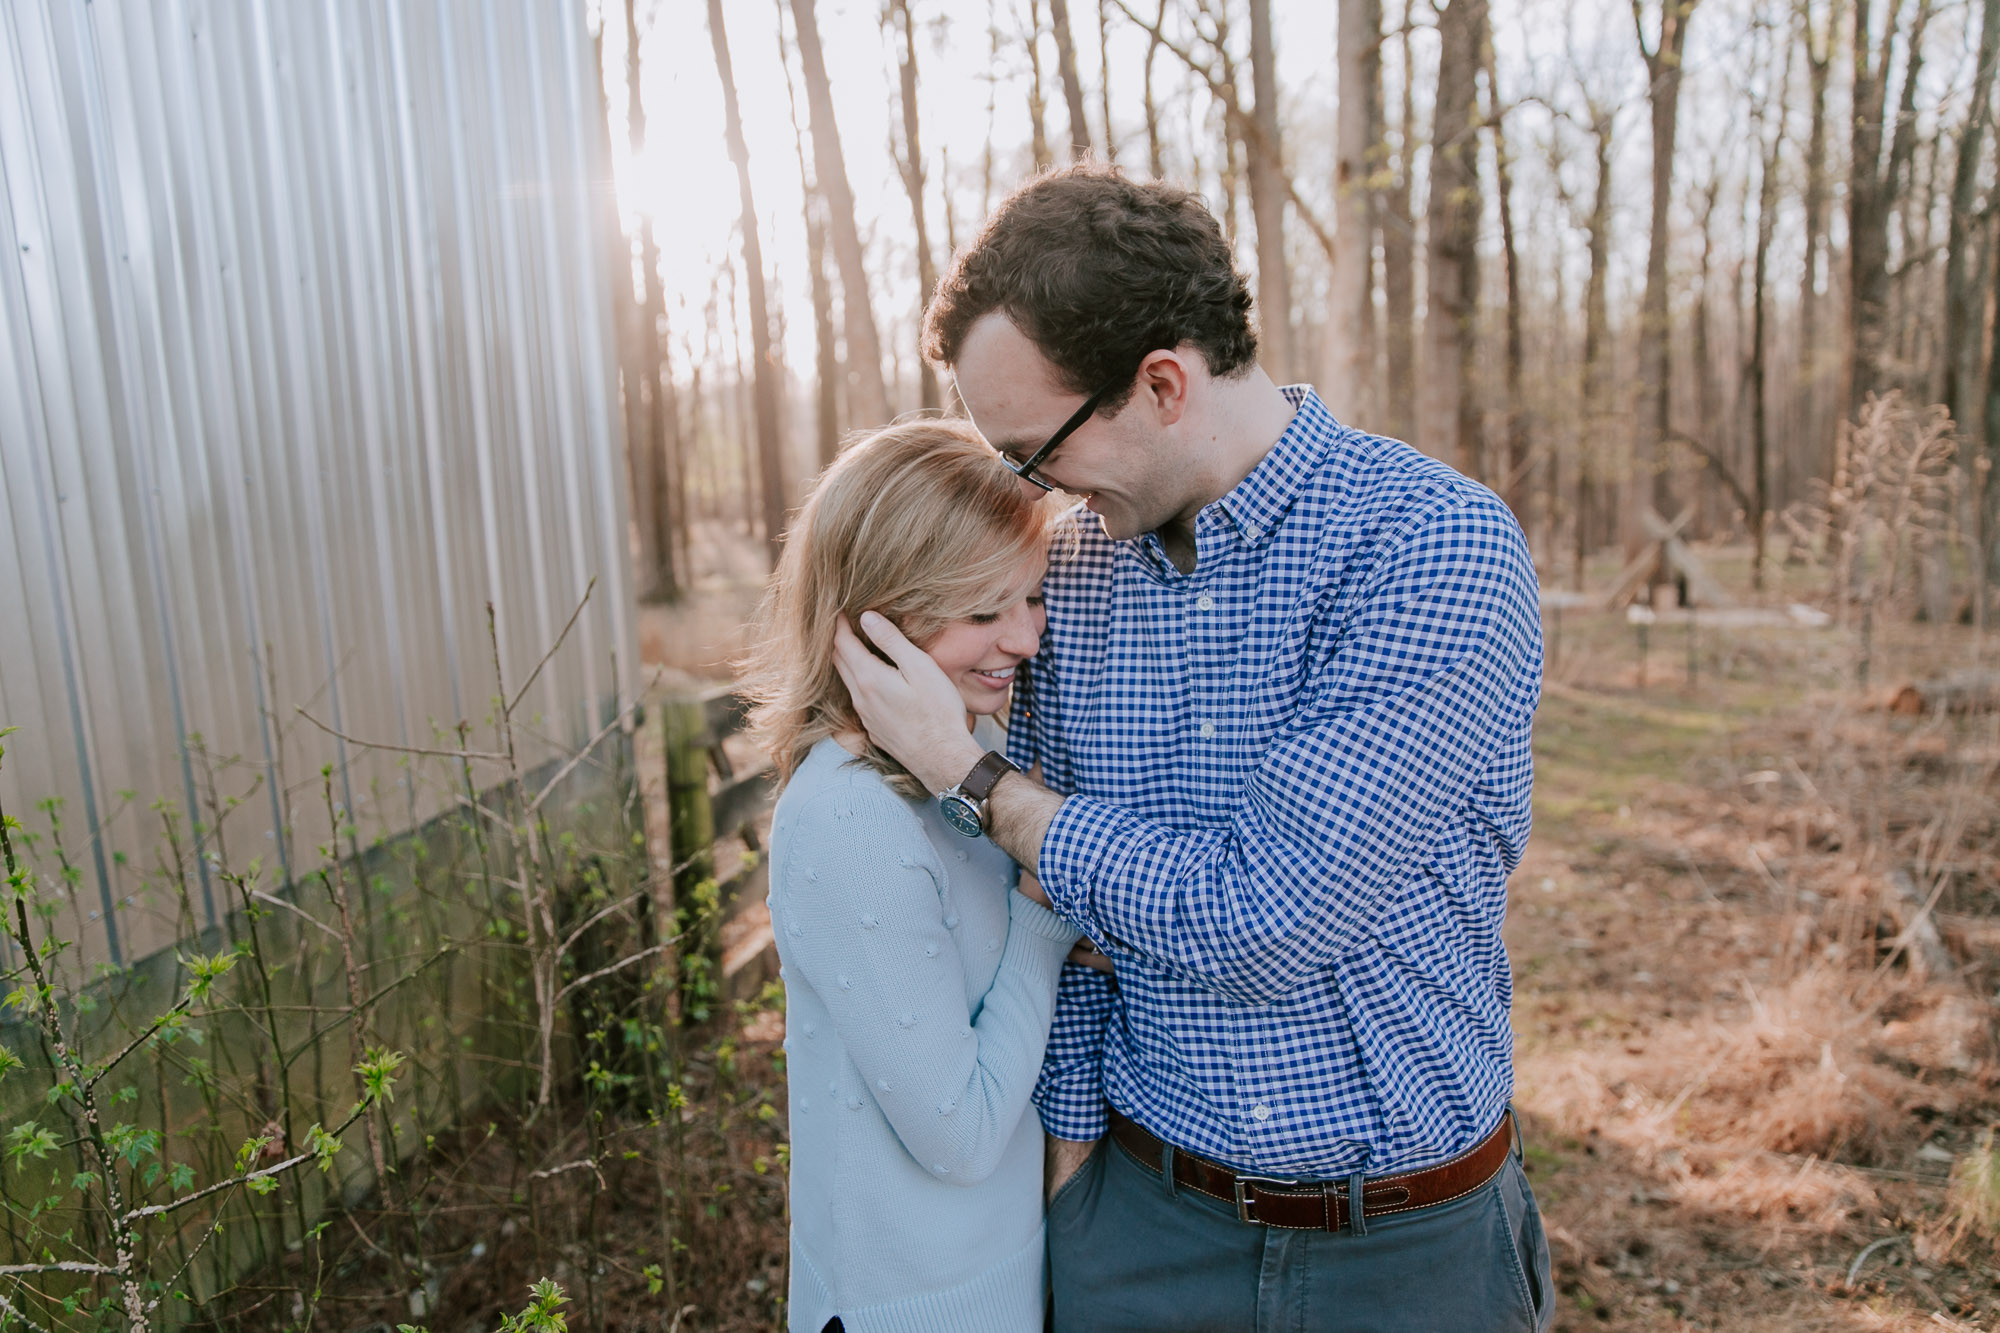 Raleigh couple at playful outdoor engagement session